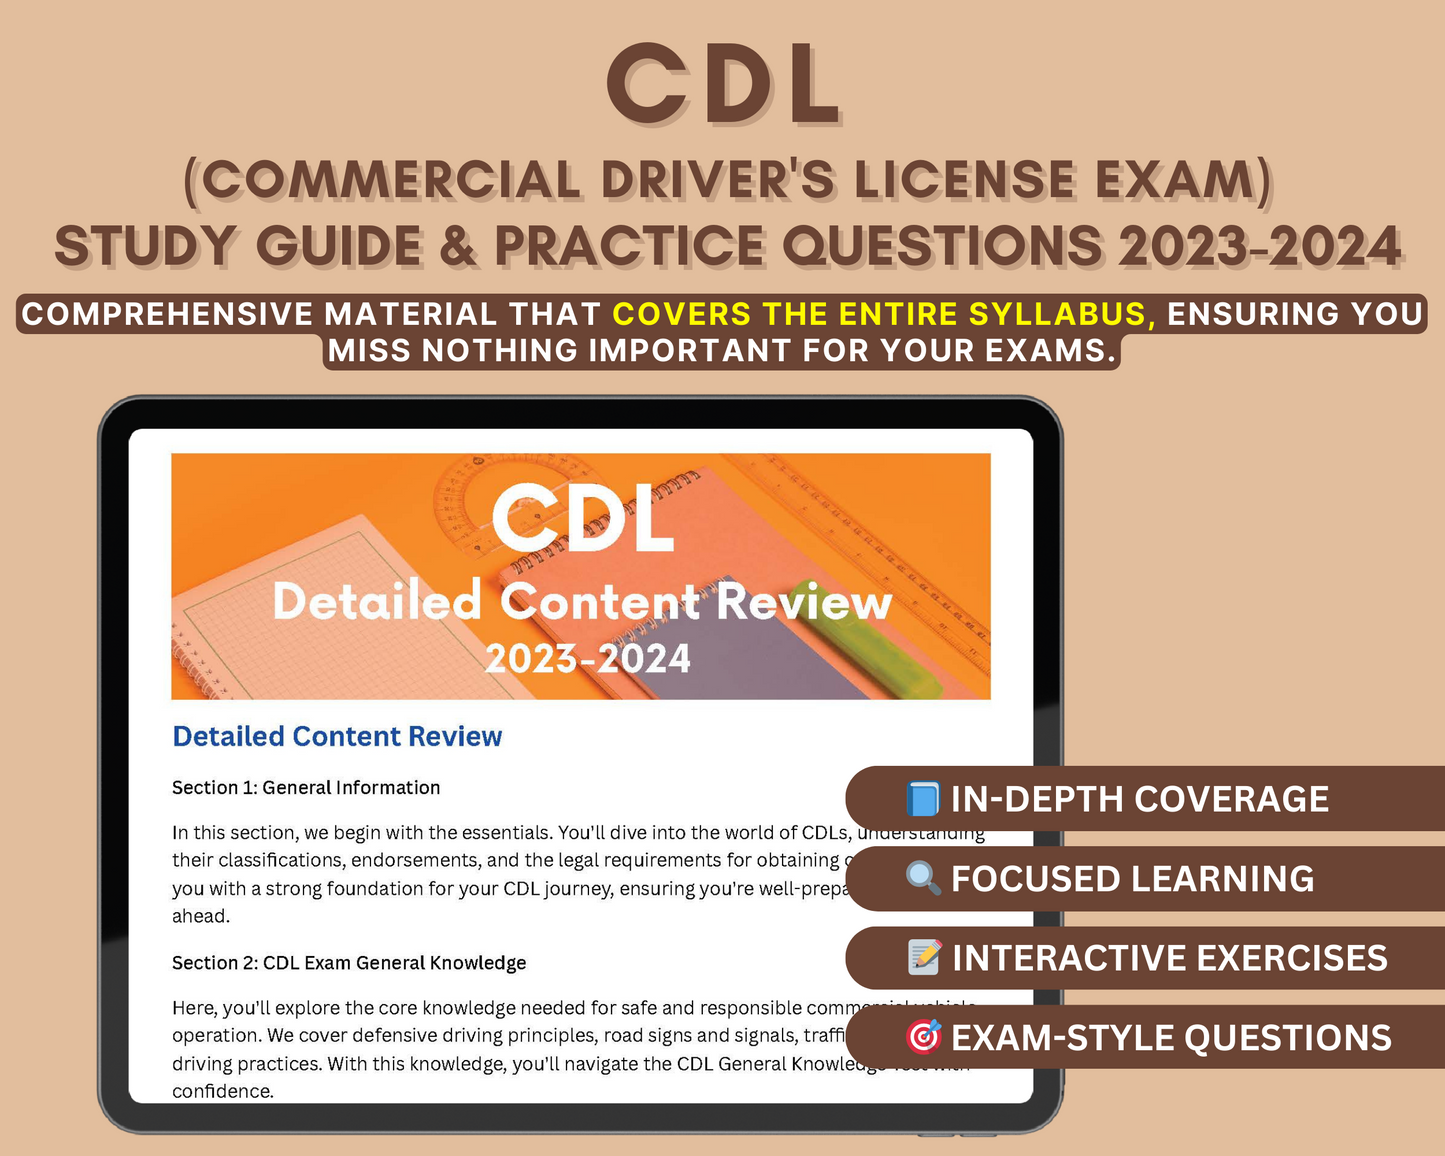 CDL Study Guide 2023-2024: Master the Commercial Driver's License Exam with In-Depth Content Review, and Practice Tests